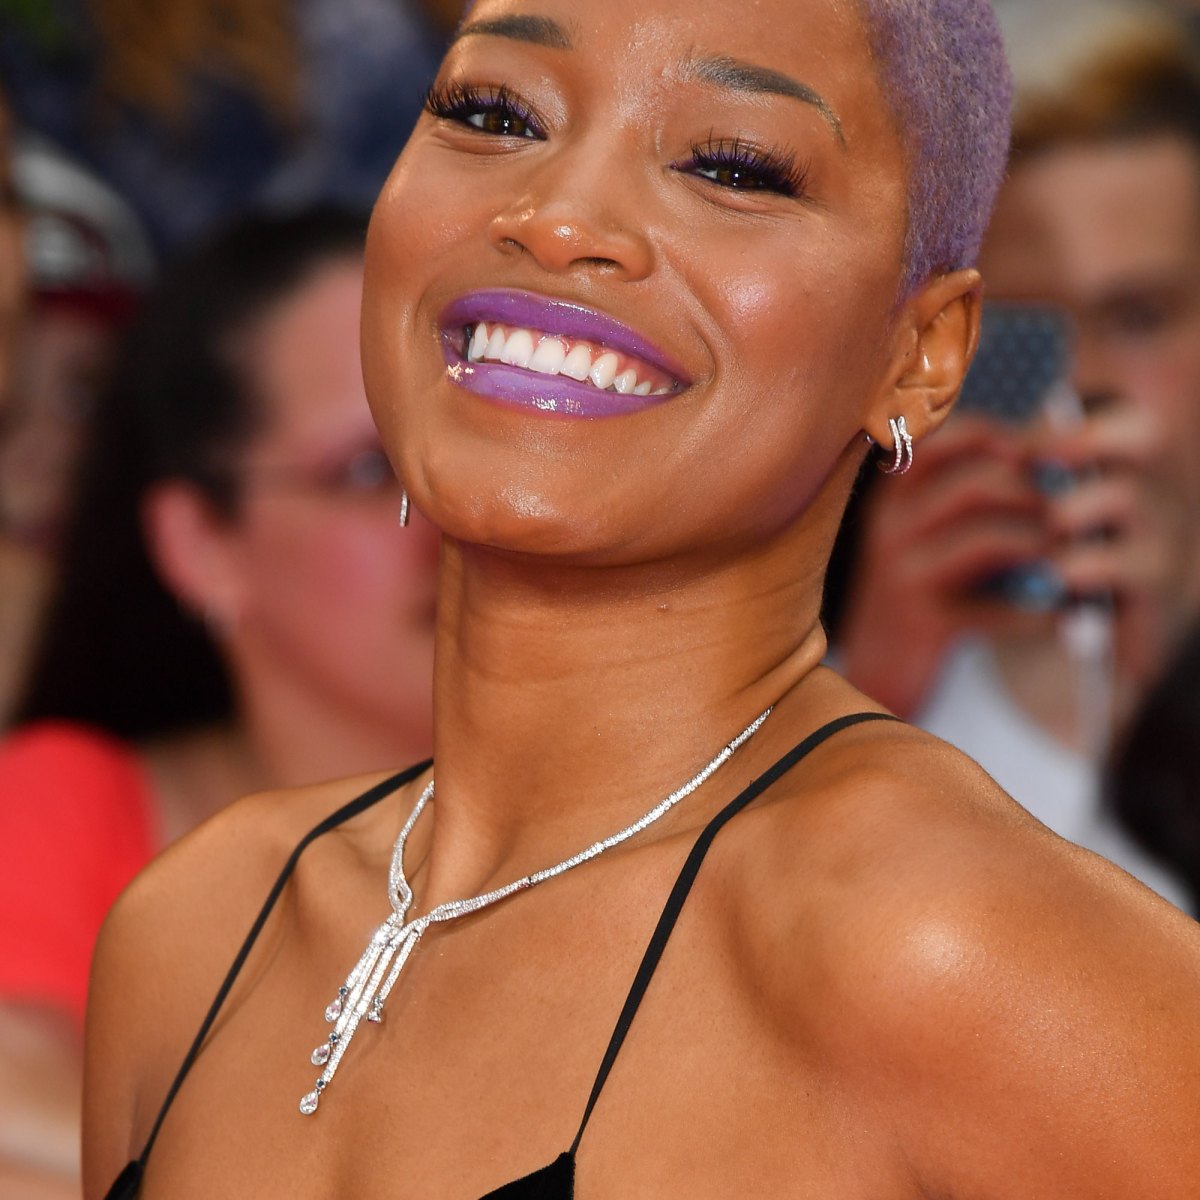 Bald Headed Black Girl In Porn - Celebrities With Shaved Heads: Stars Who Rocked the Close Crop